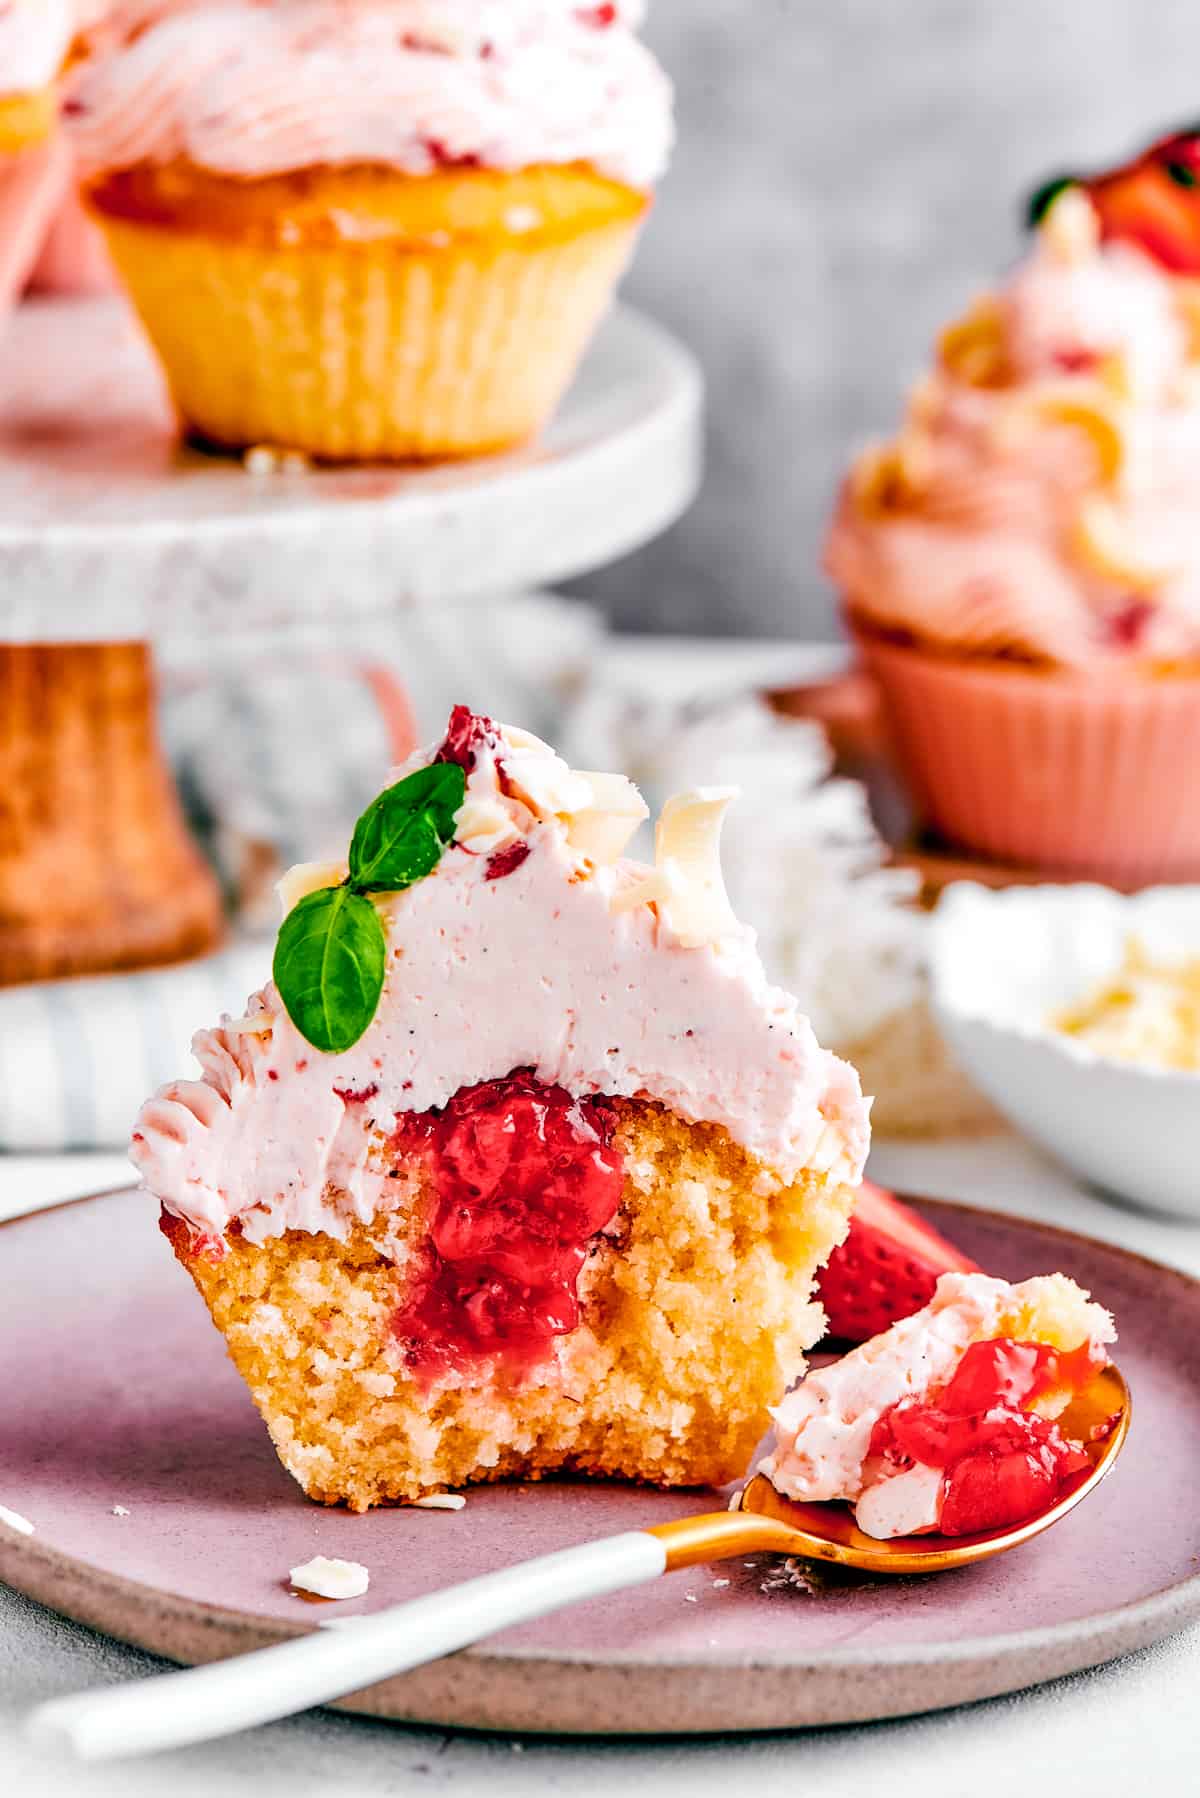 A strawberry cupcake set on a plate and cut in half to show the filling.